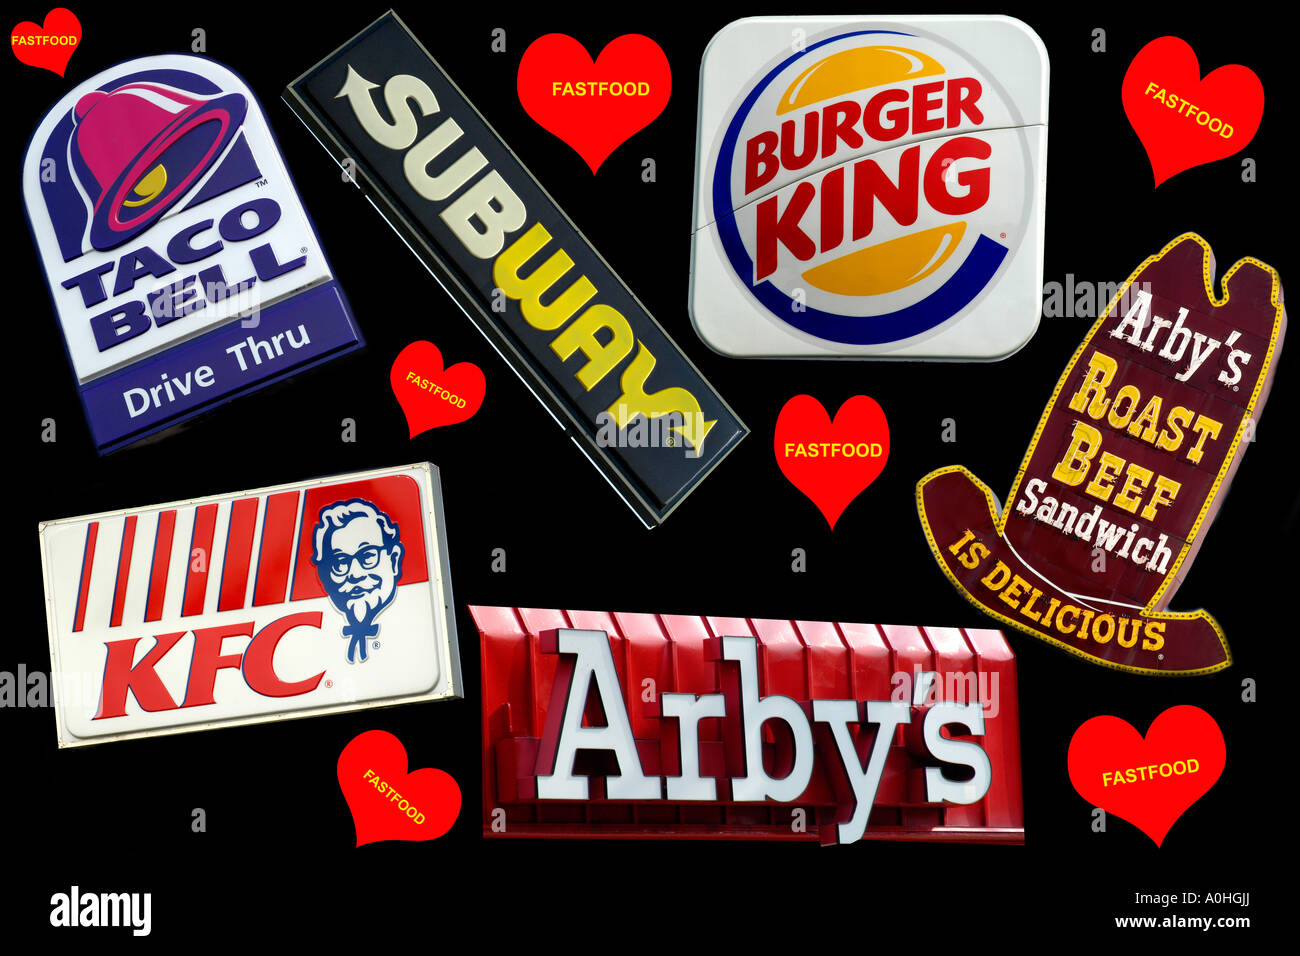 A Collage of Fast Food Restaurant signs Stock Photo